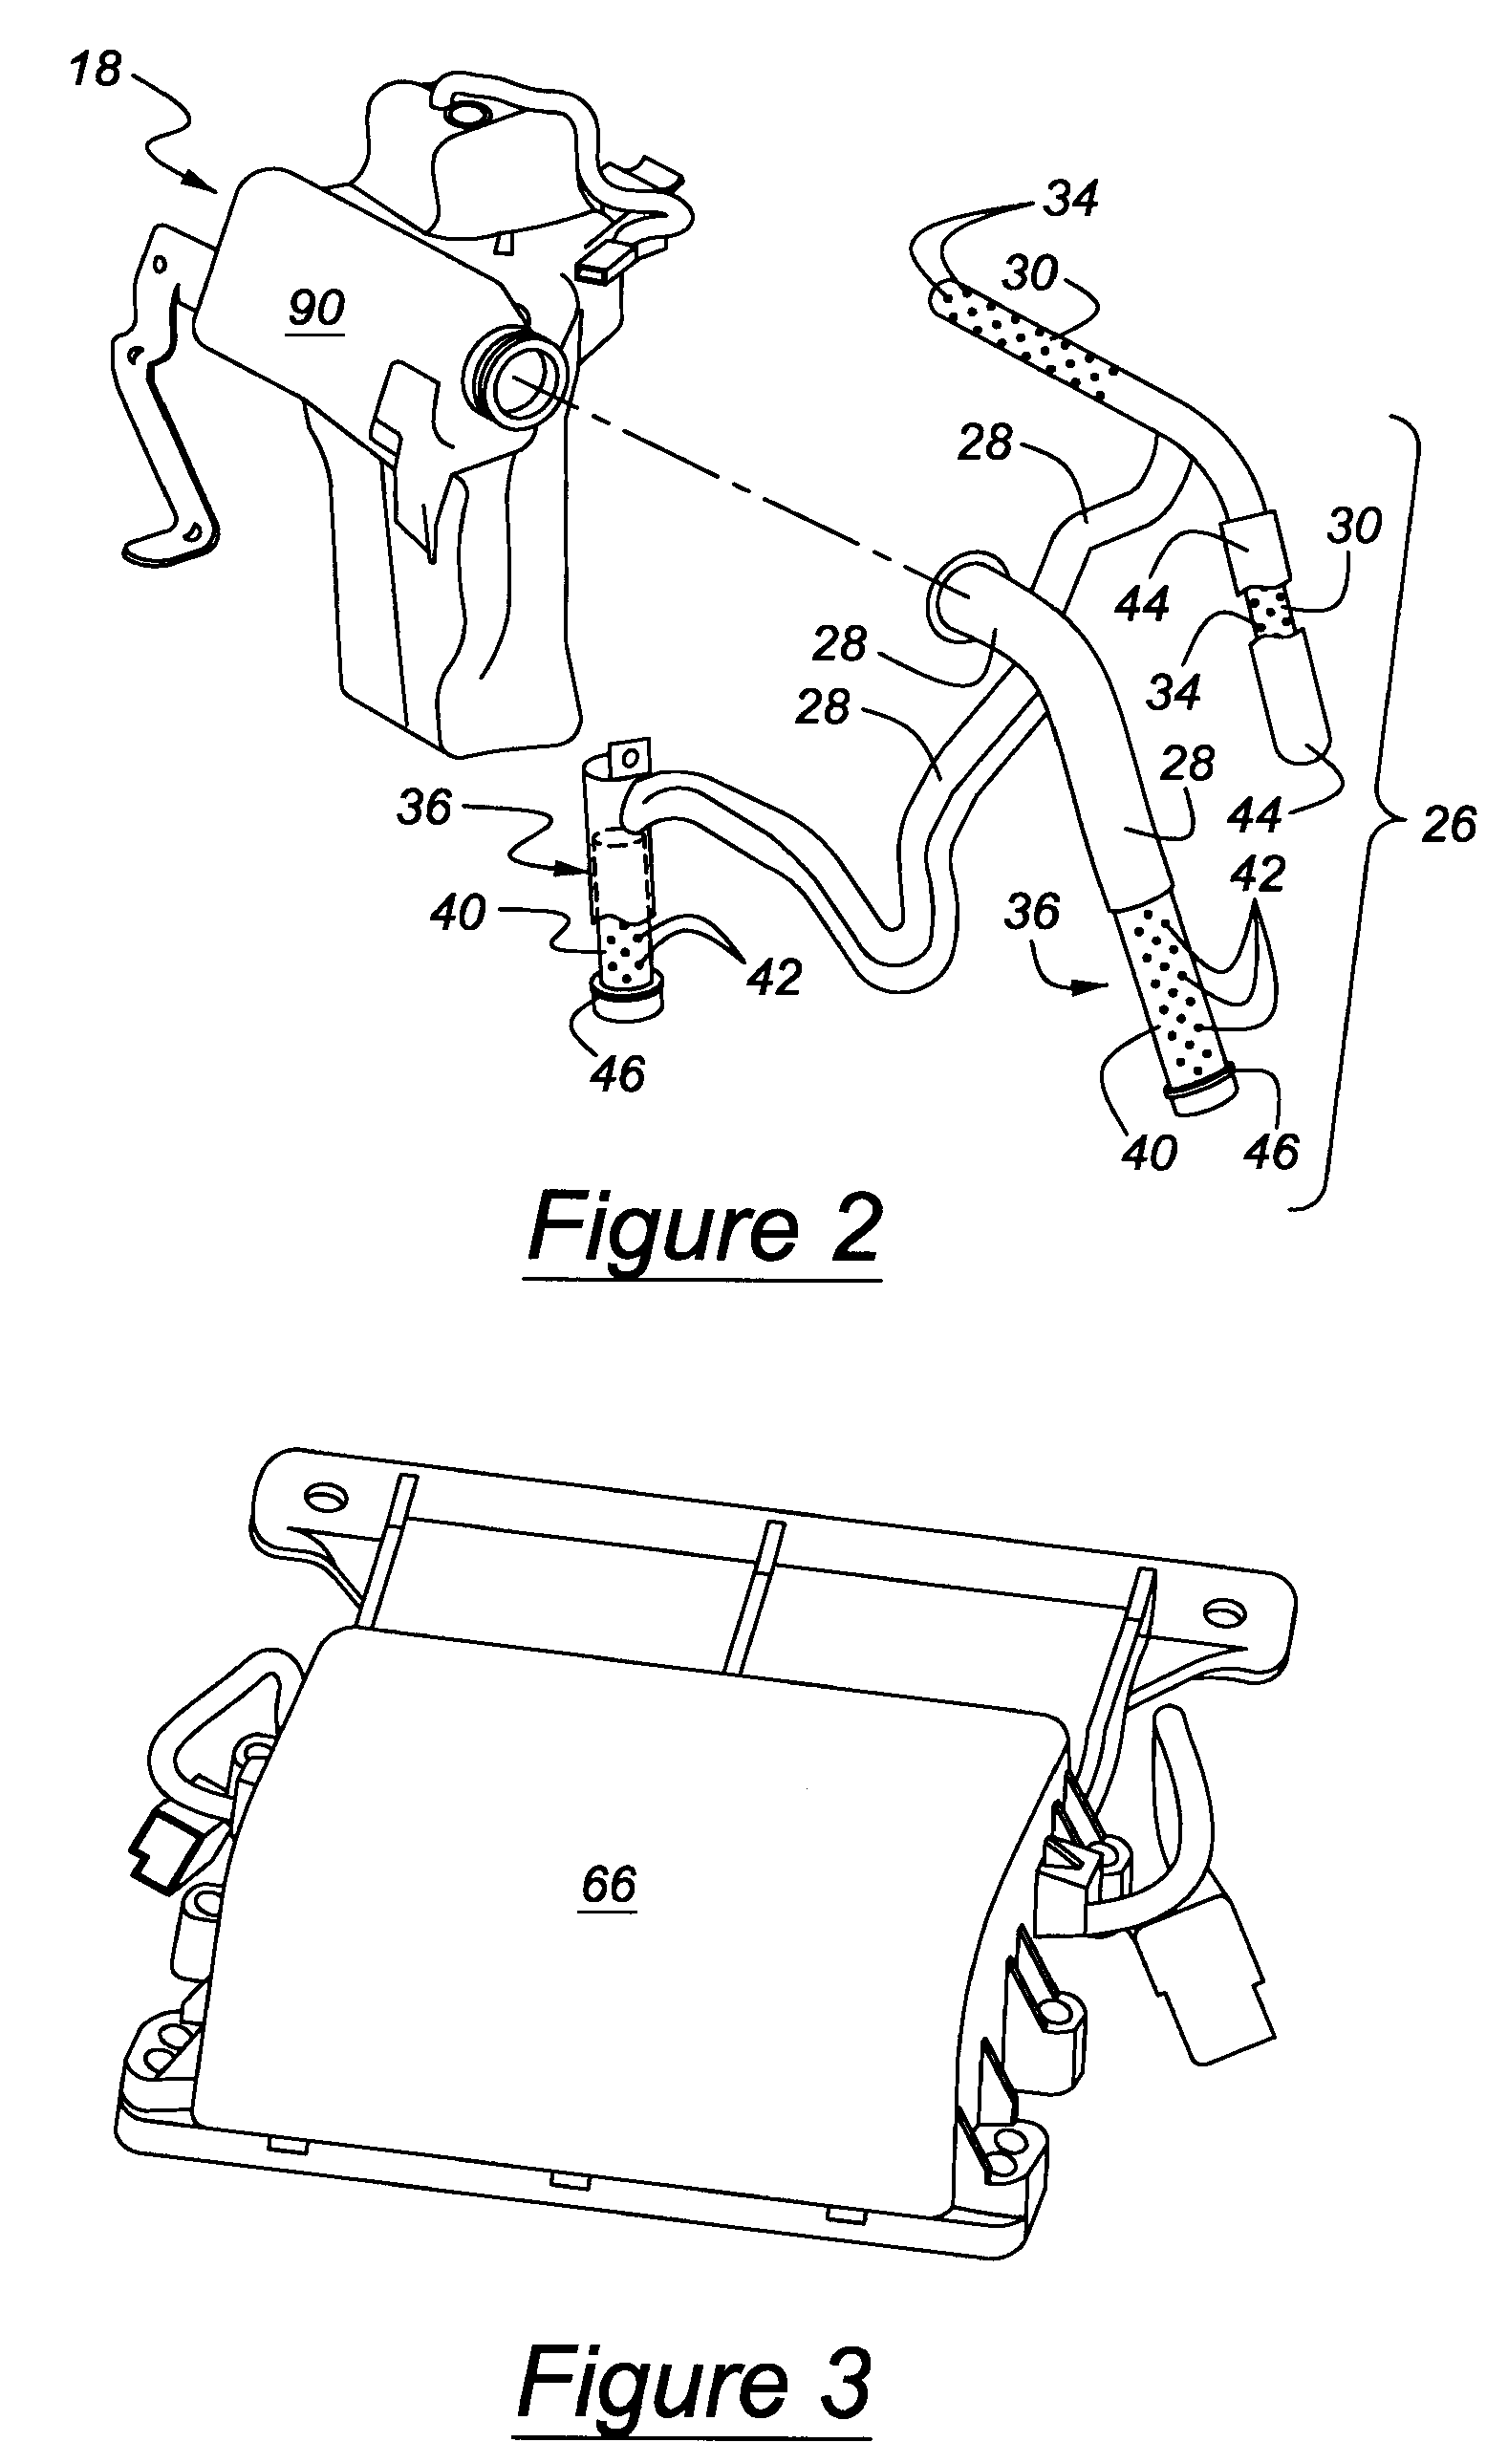 Automotive vehicle with fire suppression system